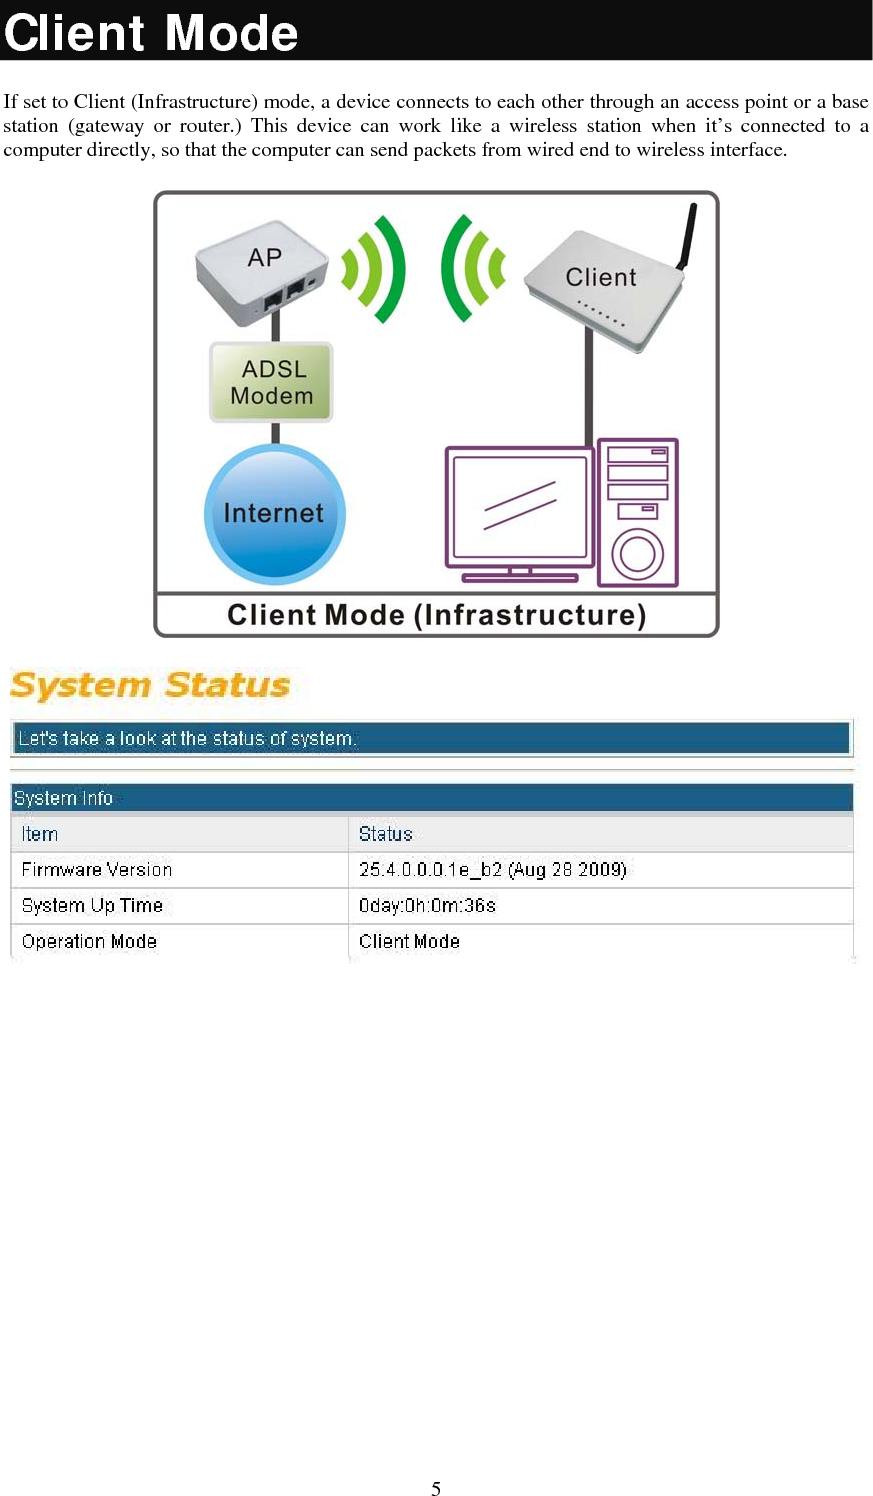   5Client Mode If set to Client (Infrastructure) mode, a device connects to each other through an access point or a base station (gateway or router.) This device can work like a wireless station when it’s connected to a computer directly, so that the computer can send packets from wired end to wireless interface.       